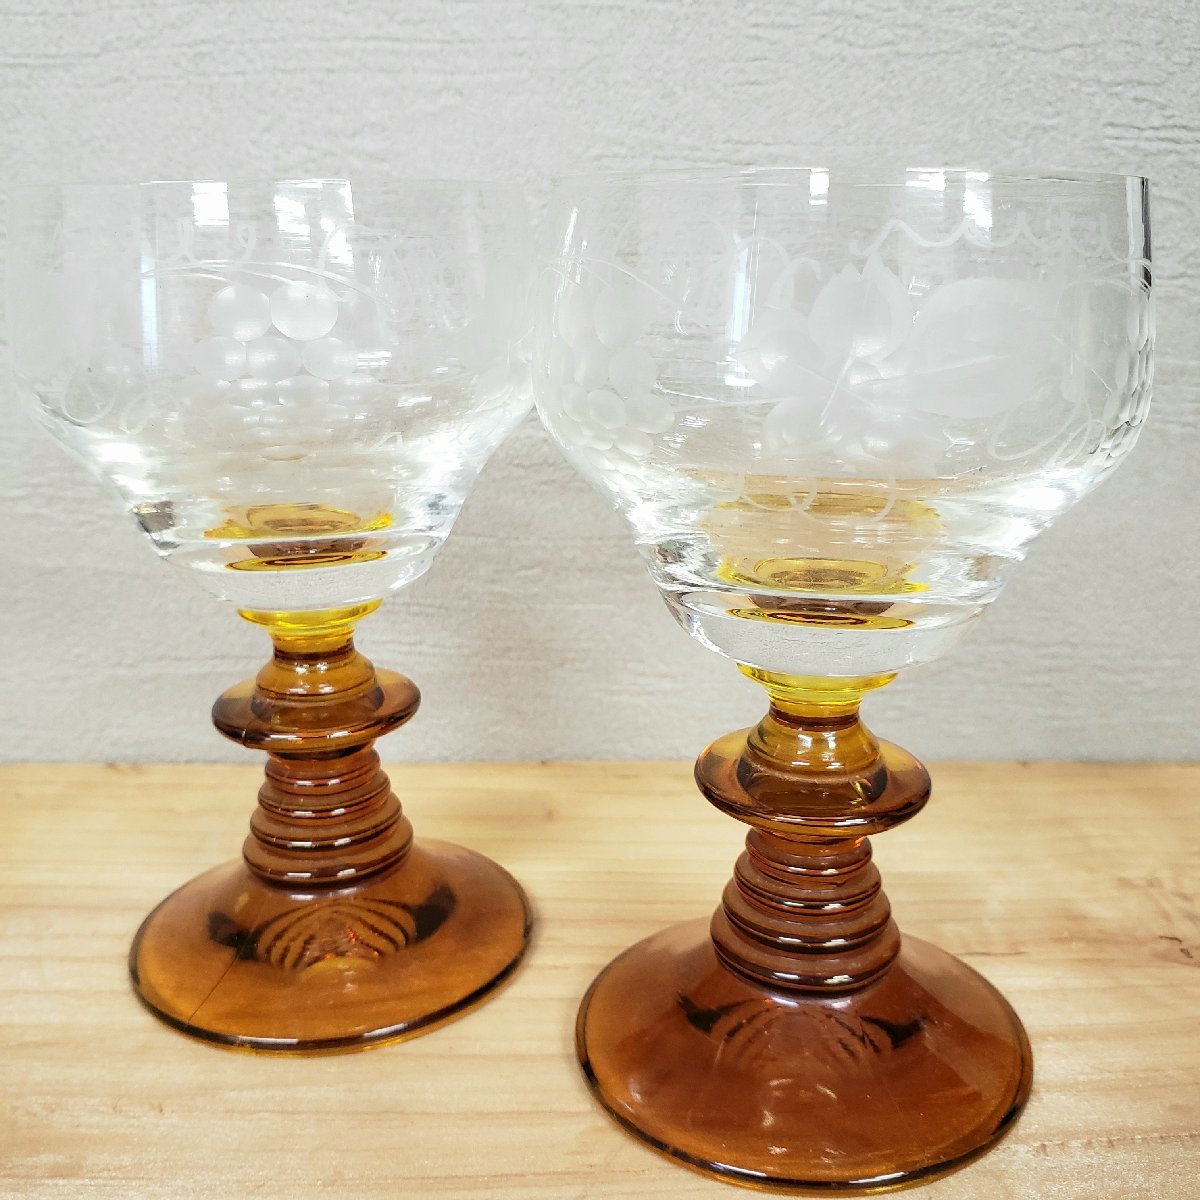  wine glass pair re-ma- glass amber honey color grape pattern glass sculpture antique retro Germany made? height 11.8cm [60a311]